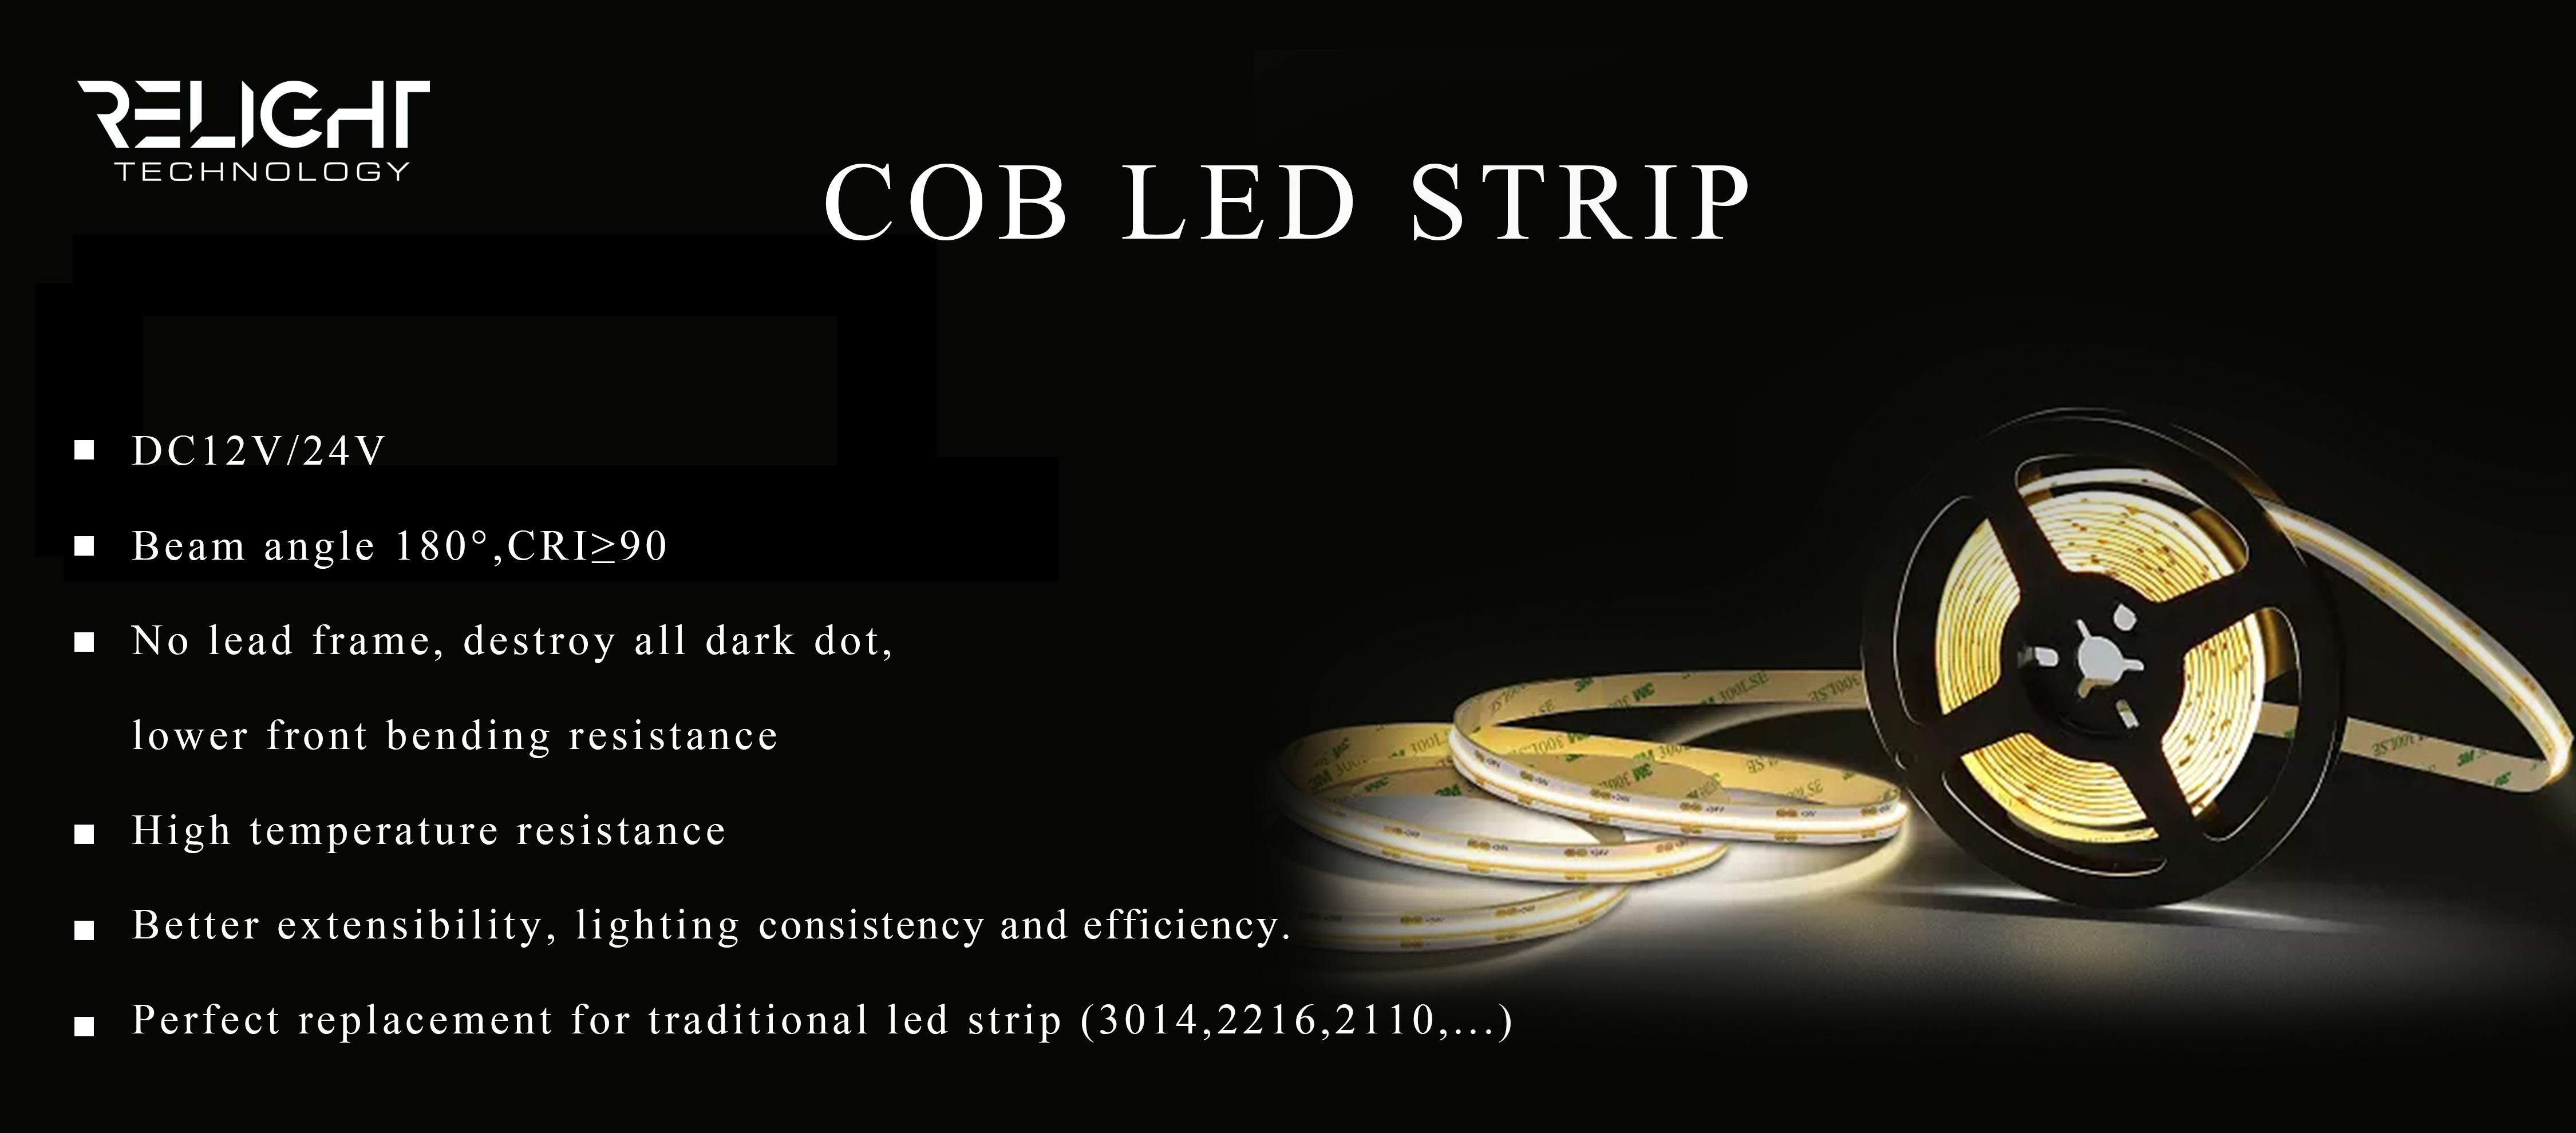 2019 Hot sale cob flexible led strip light replacement for traditional led strip